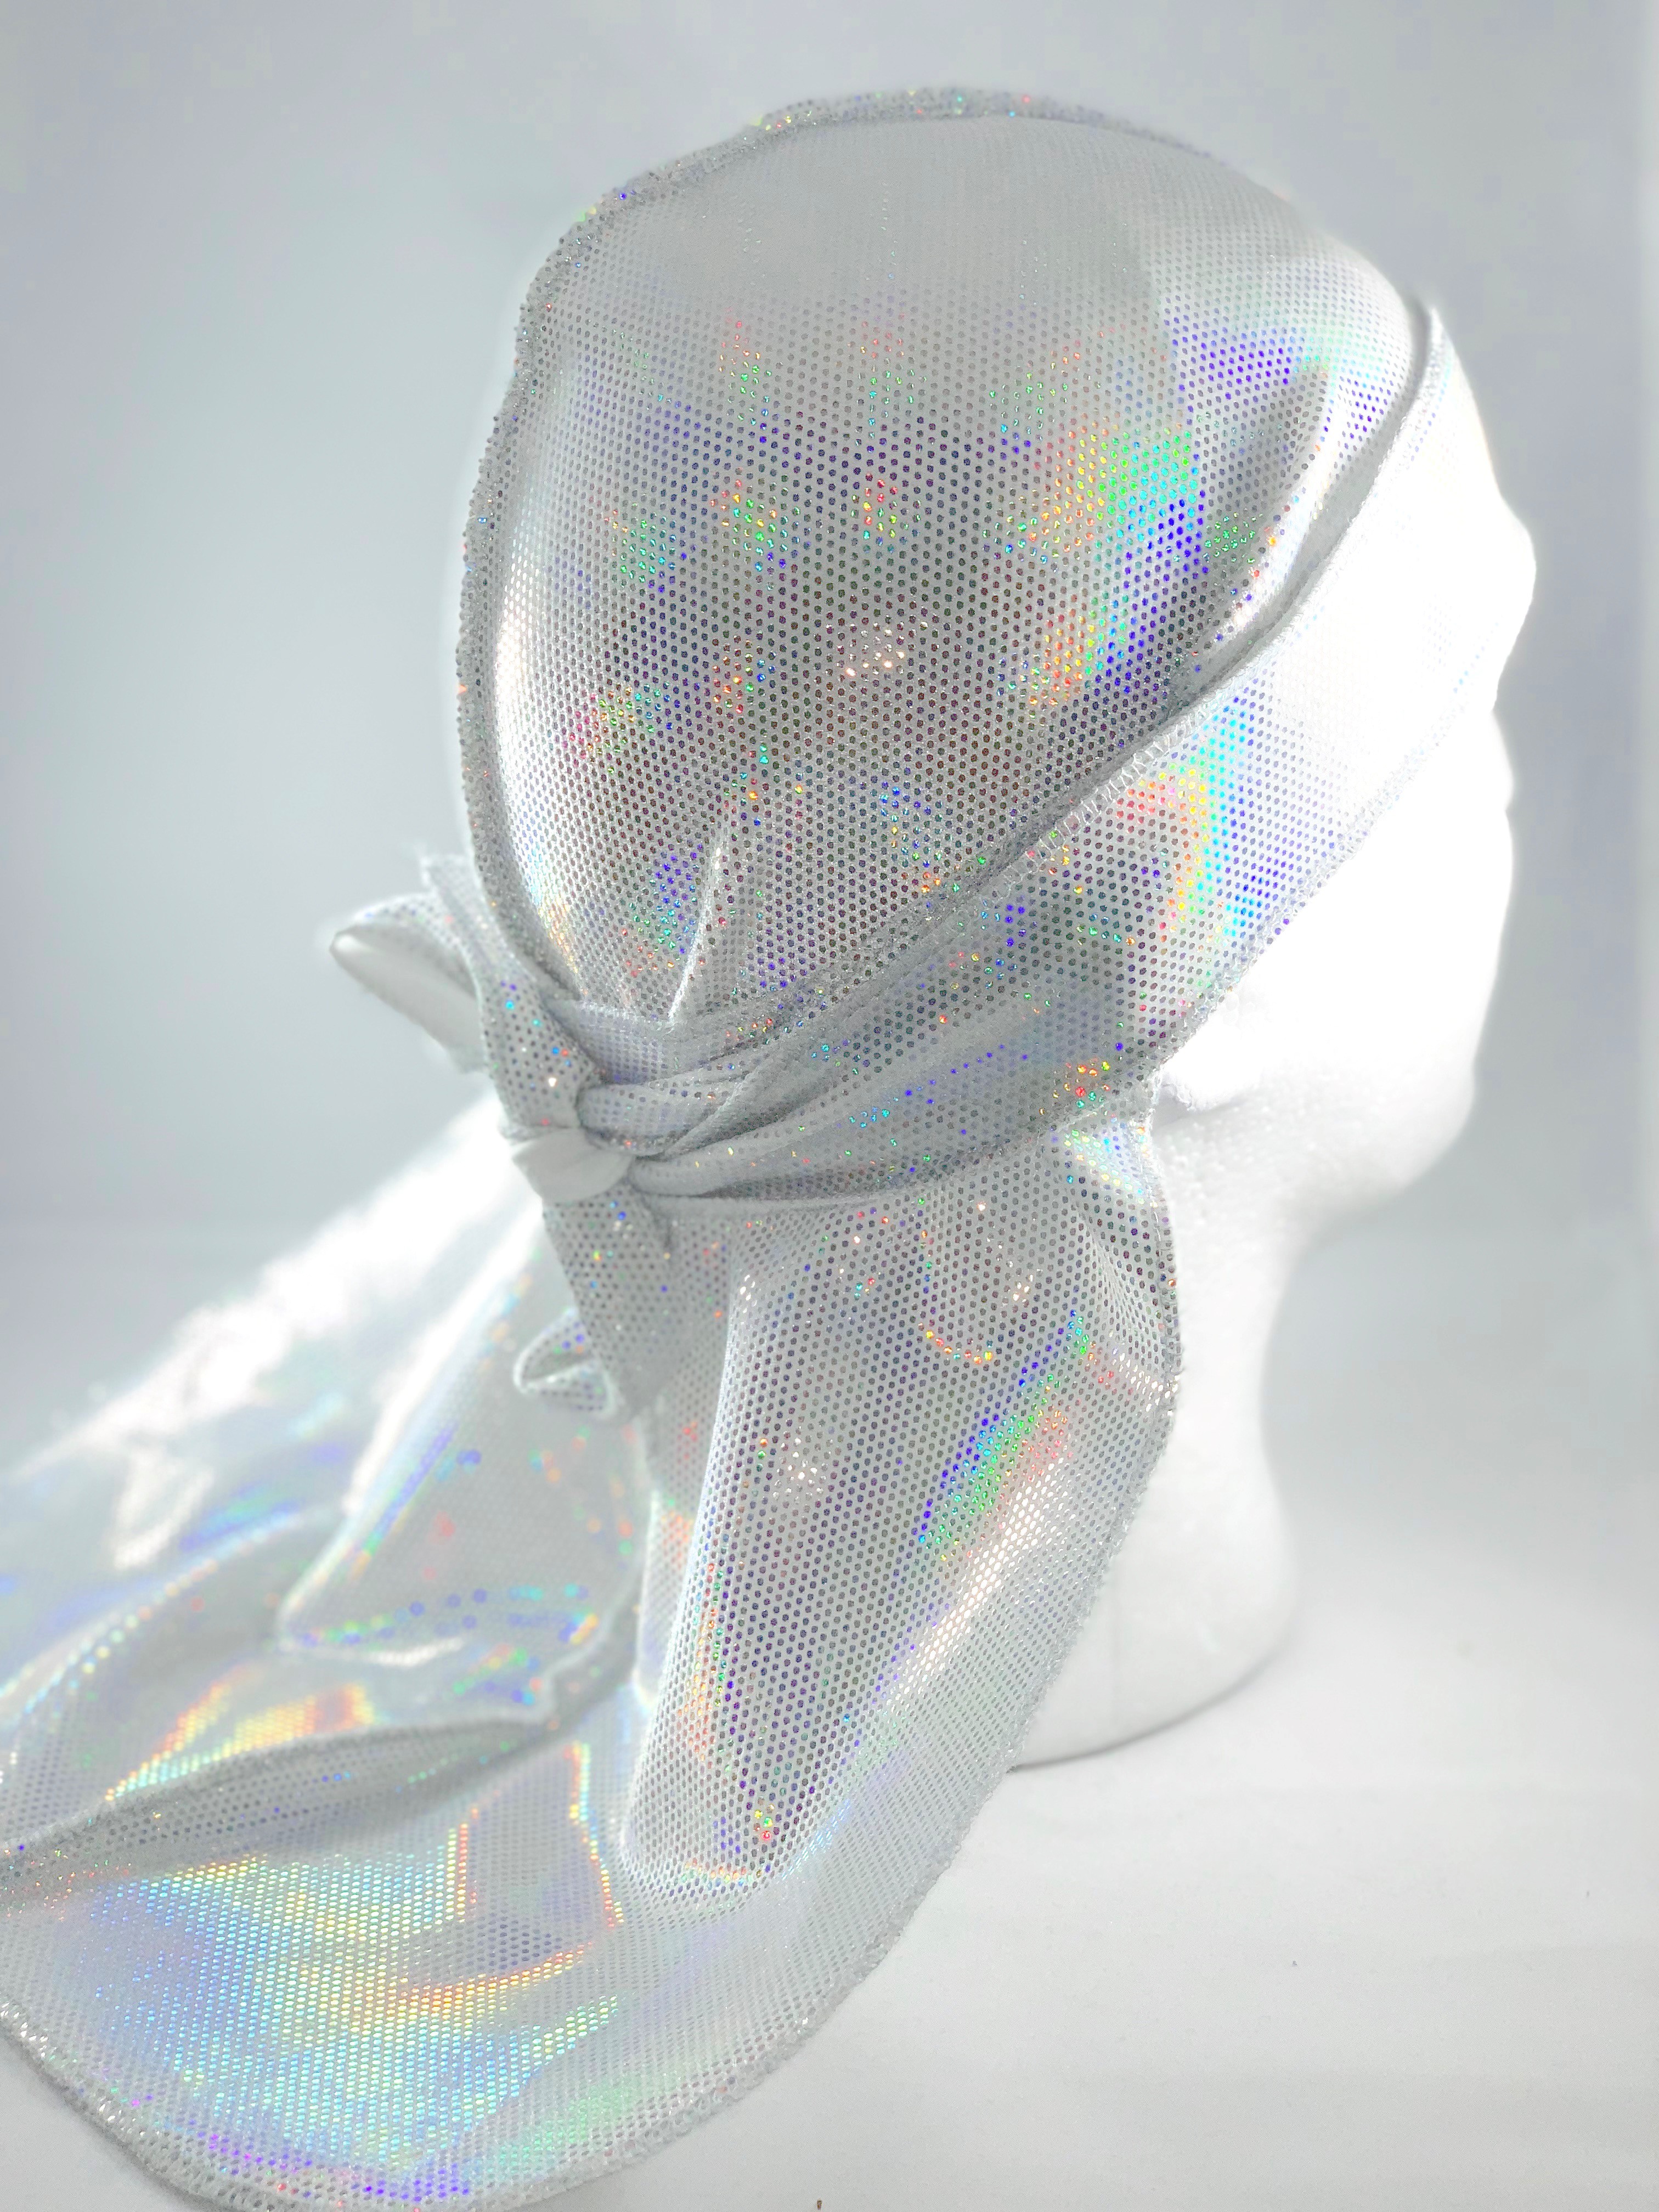 Holographic Durags by iCareHair